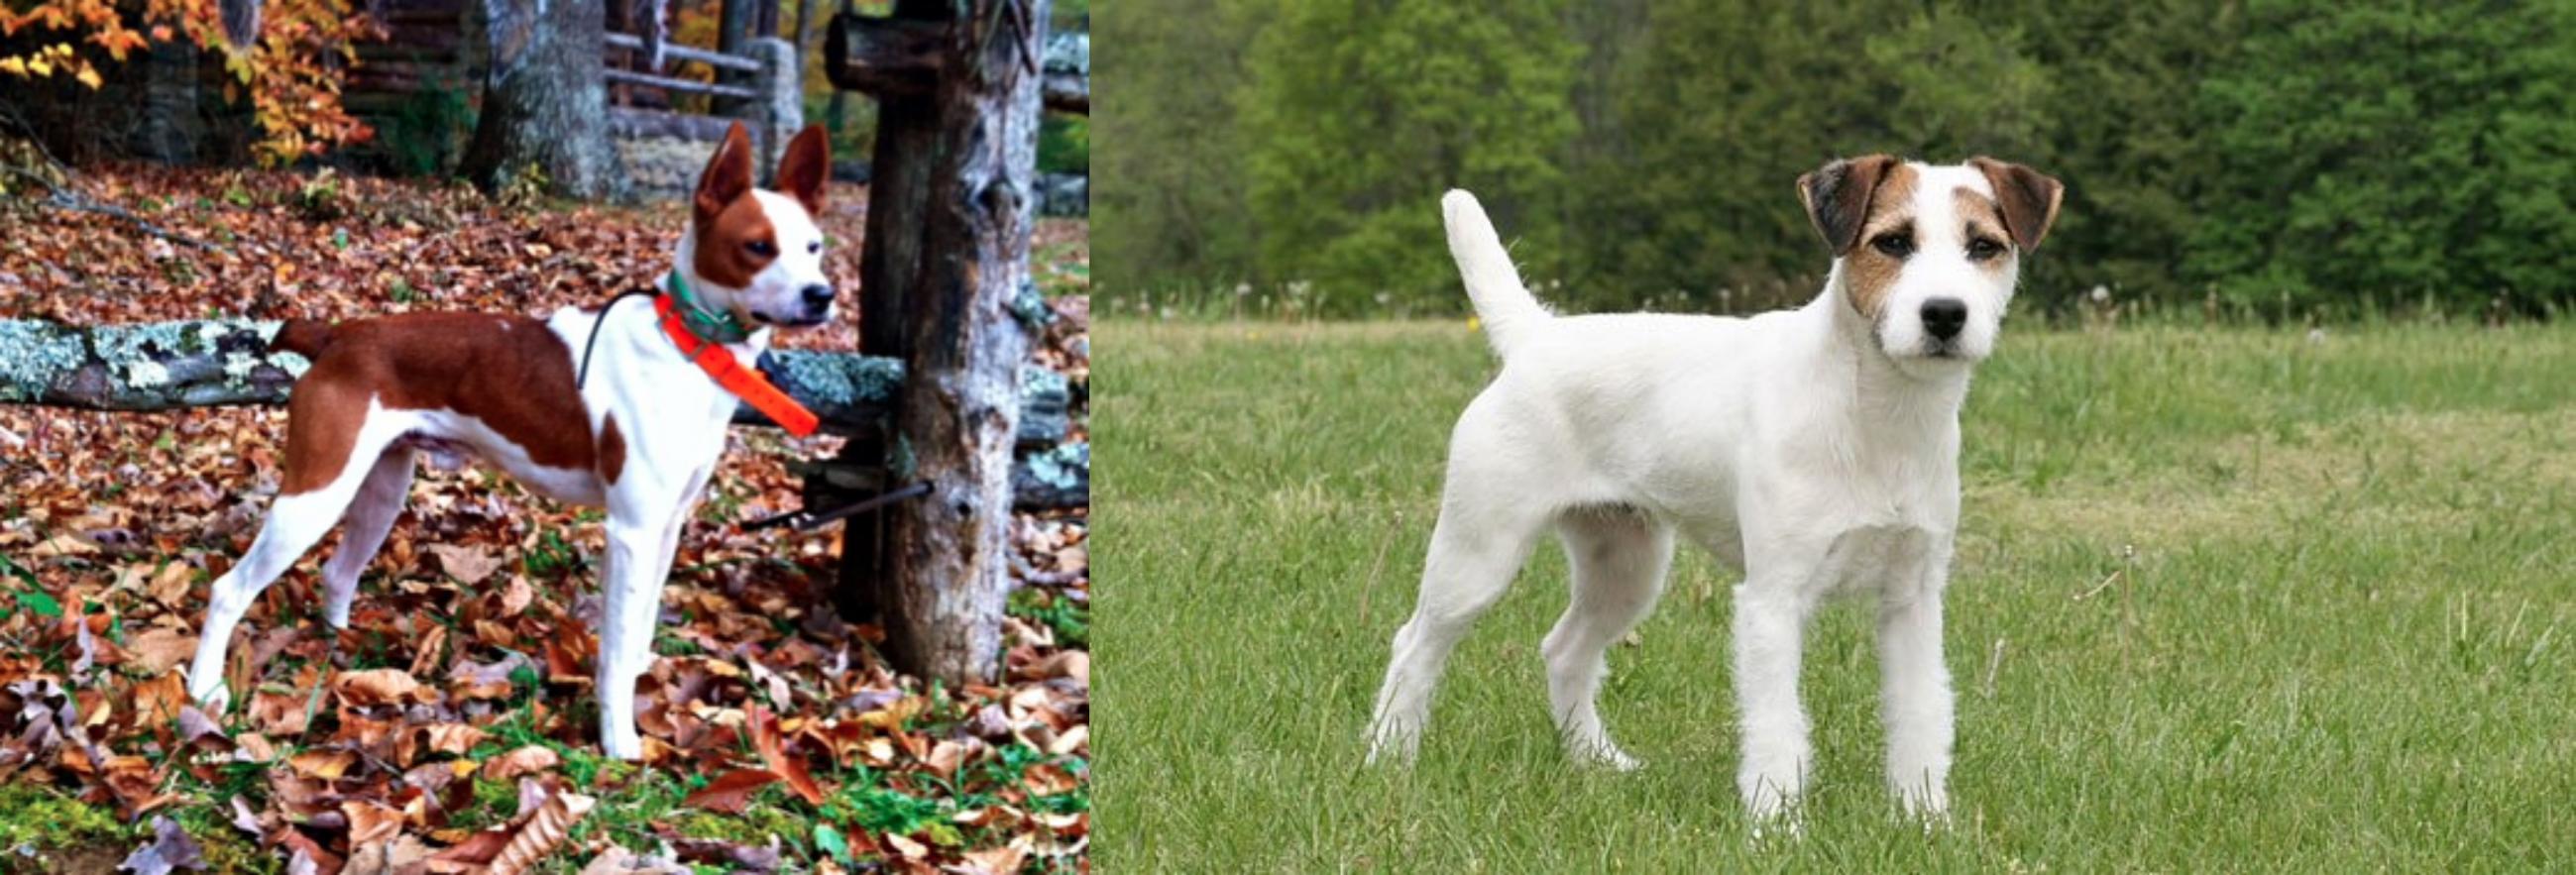 Mountain Feist Vs Jack Russell Terrier Breed Comparison